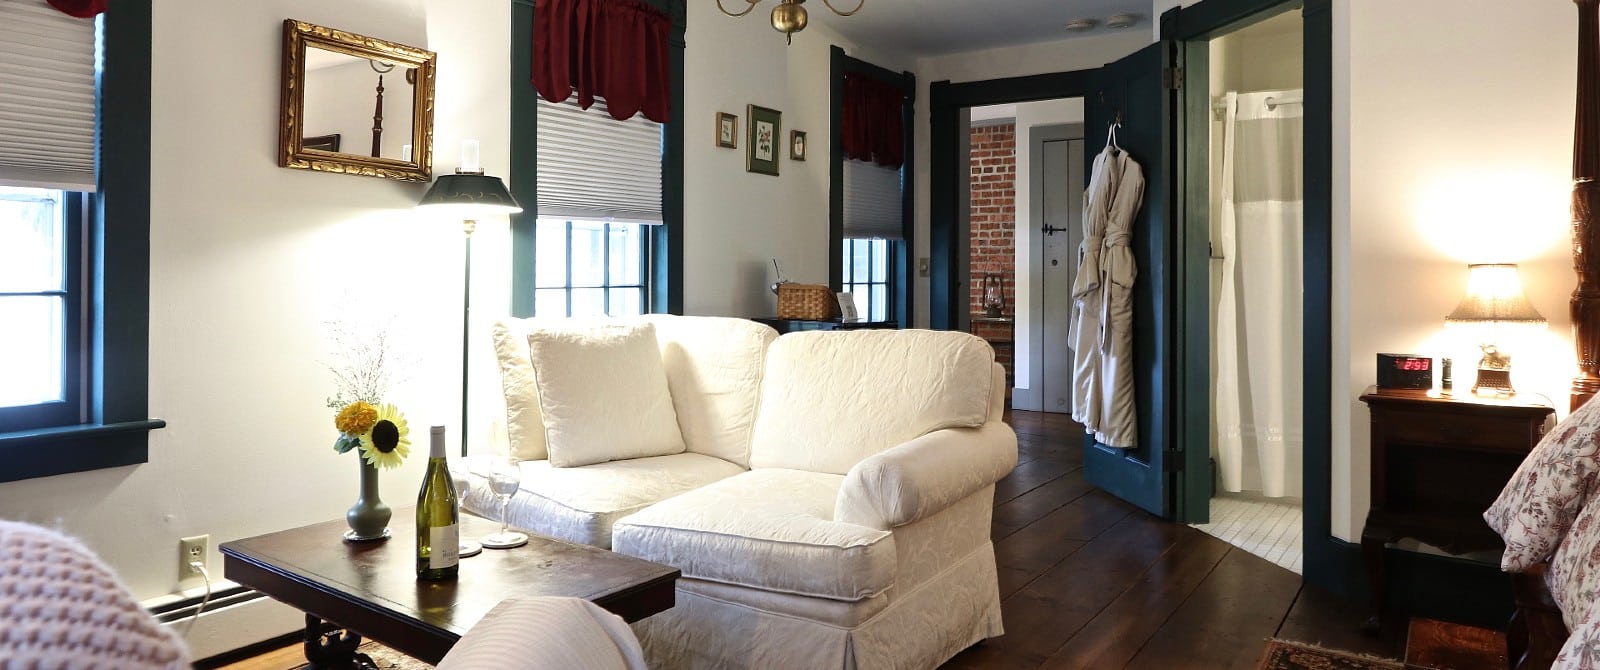 Sitting area of a bedroom with a white couch, coffee table and robe hanging on a doorway to a bathroom